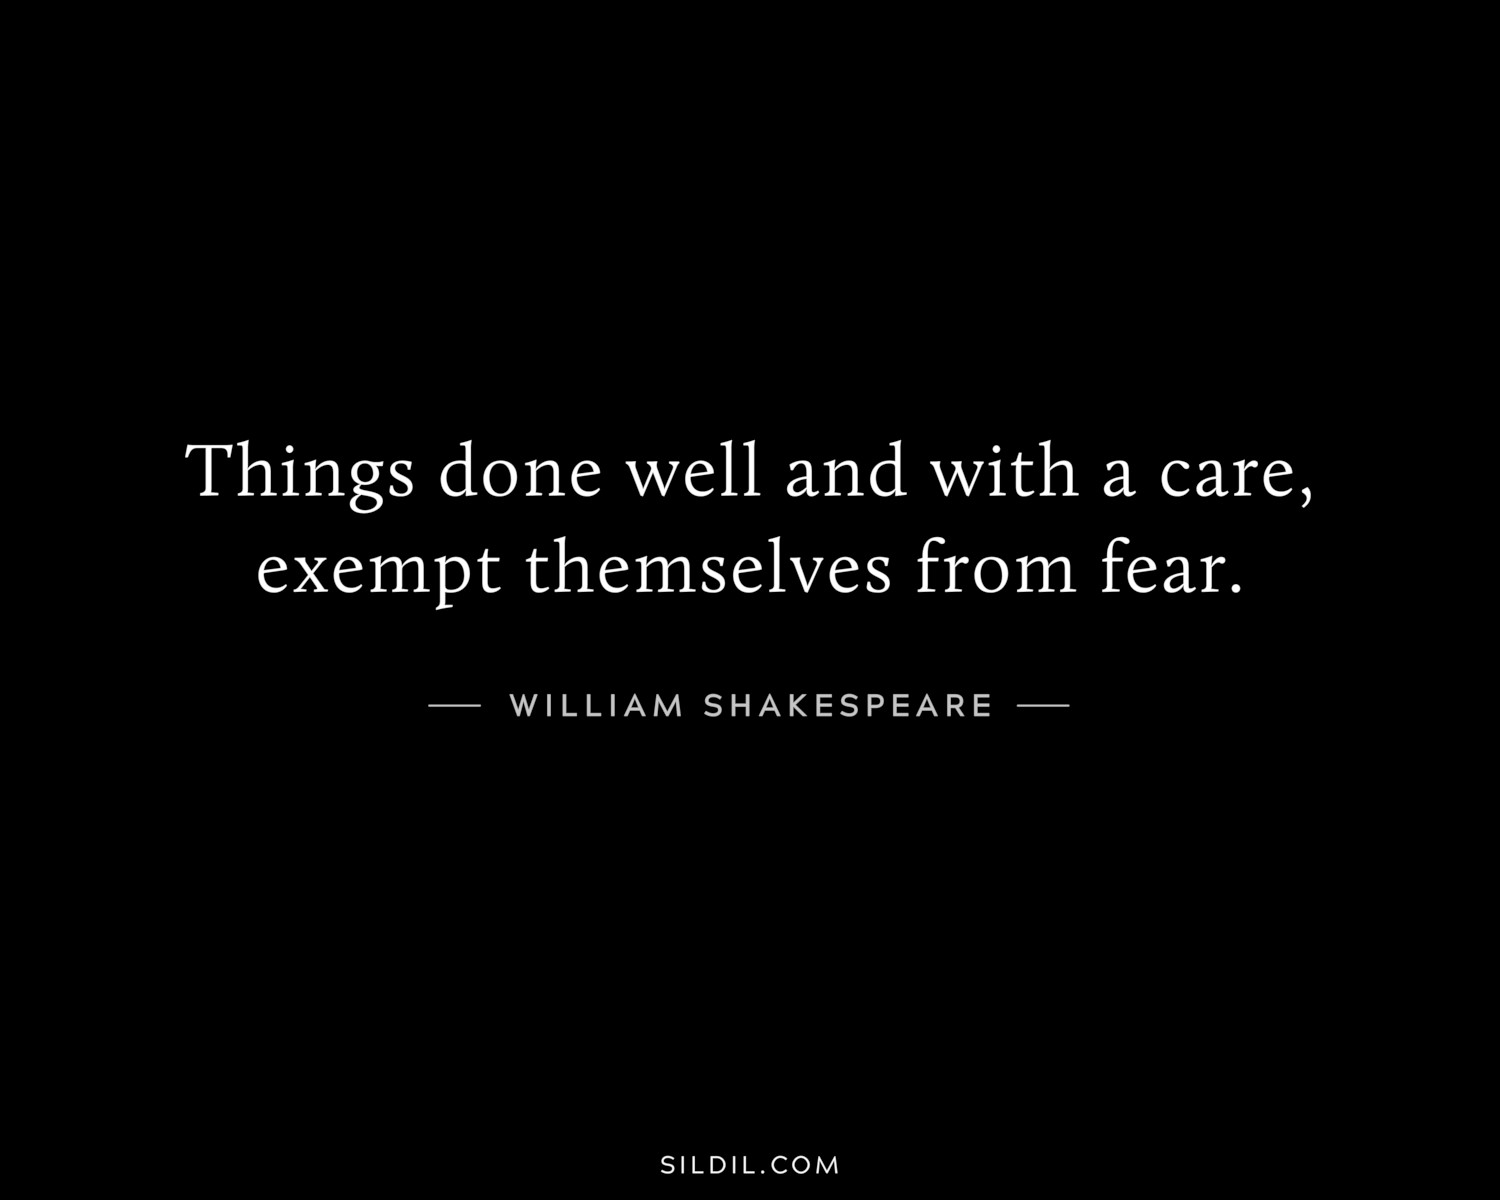 Things done well and with a care, exempt themselves from fear.